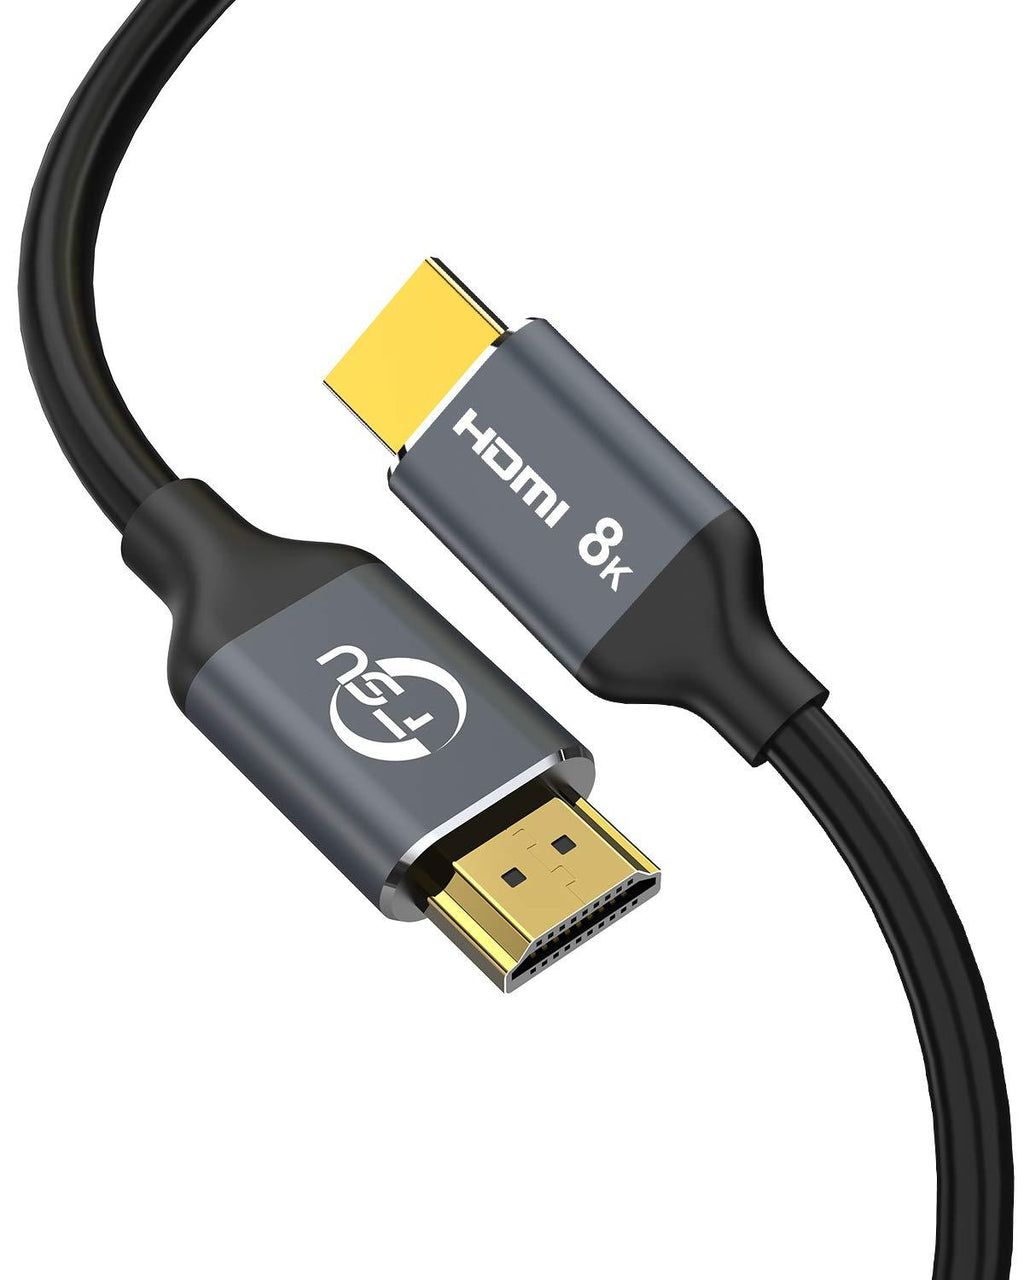 8K HDMI 2.1 Cable 3.3FT,Ultra High Speed 8K@60HZ 4K@120Hz 48Gbps Ultra HD HDMI to HDMI Cord, Support Dynamic HDR, eARC, Dolby Atmos,Compatible with Roku,Laptop,Monitor,PS4,PS5,Apple TV,Xbox&More 8K/3.3FT